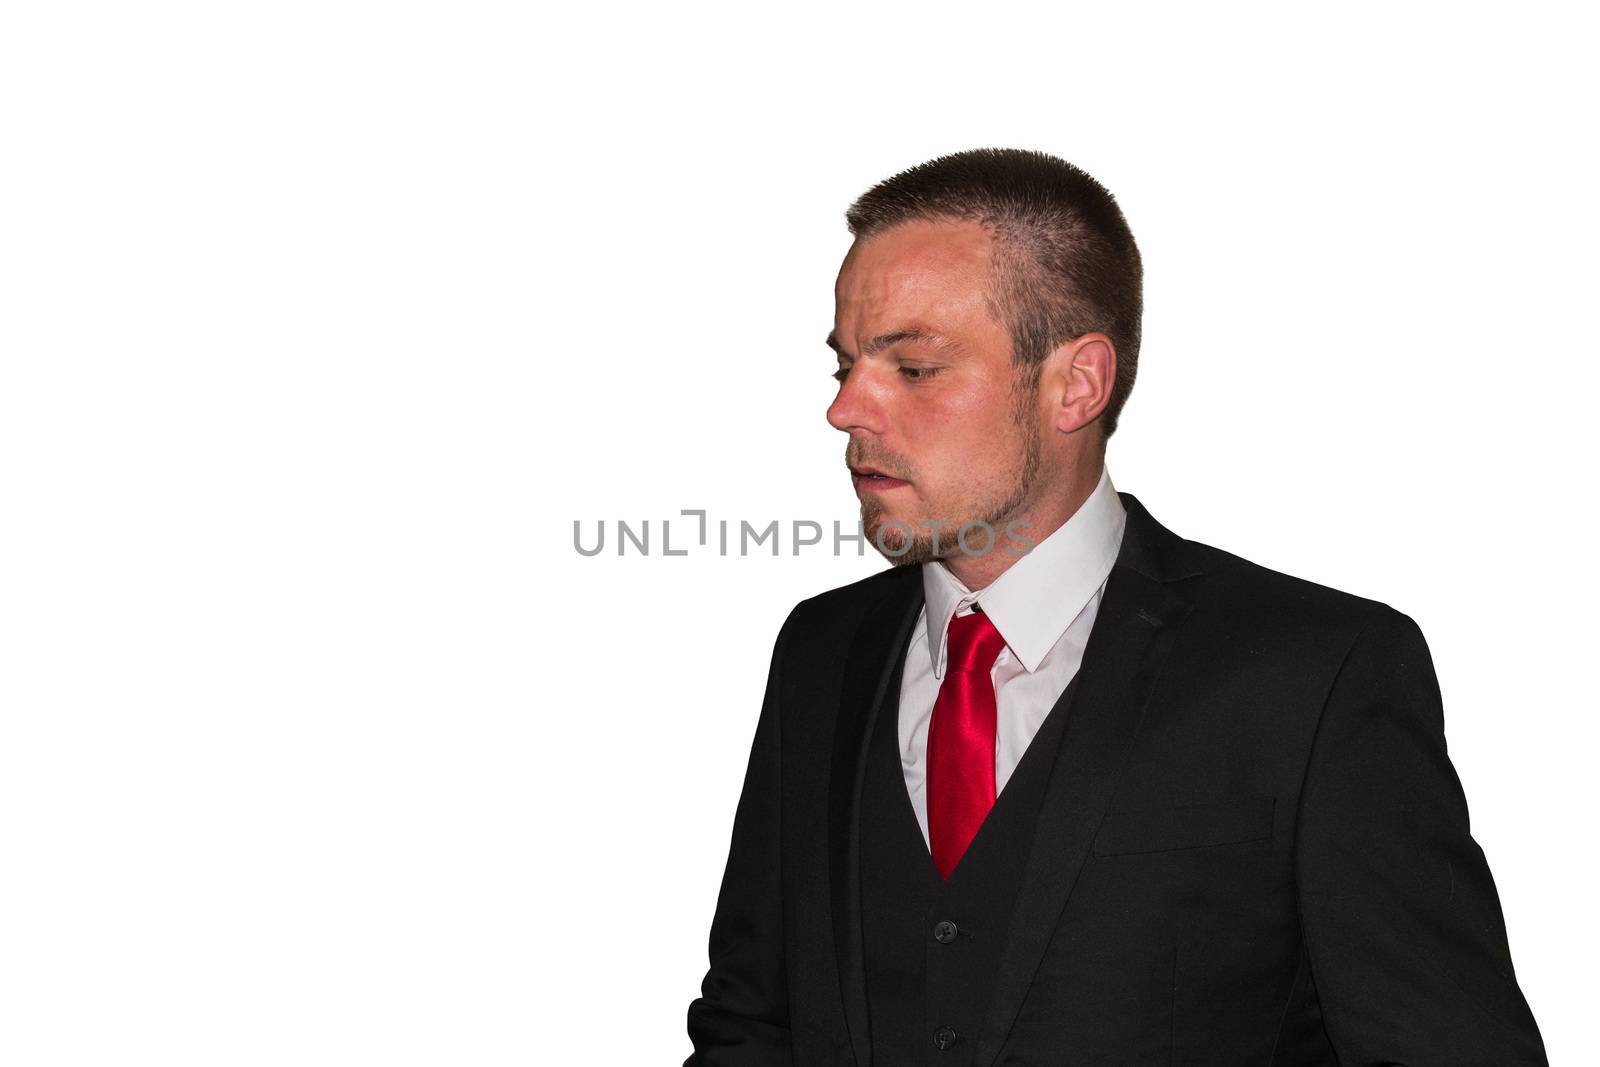 Young man in a suit            by JFsPic